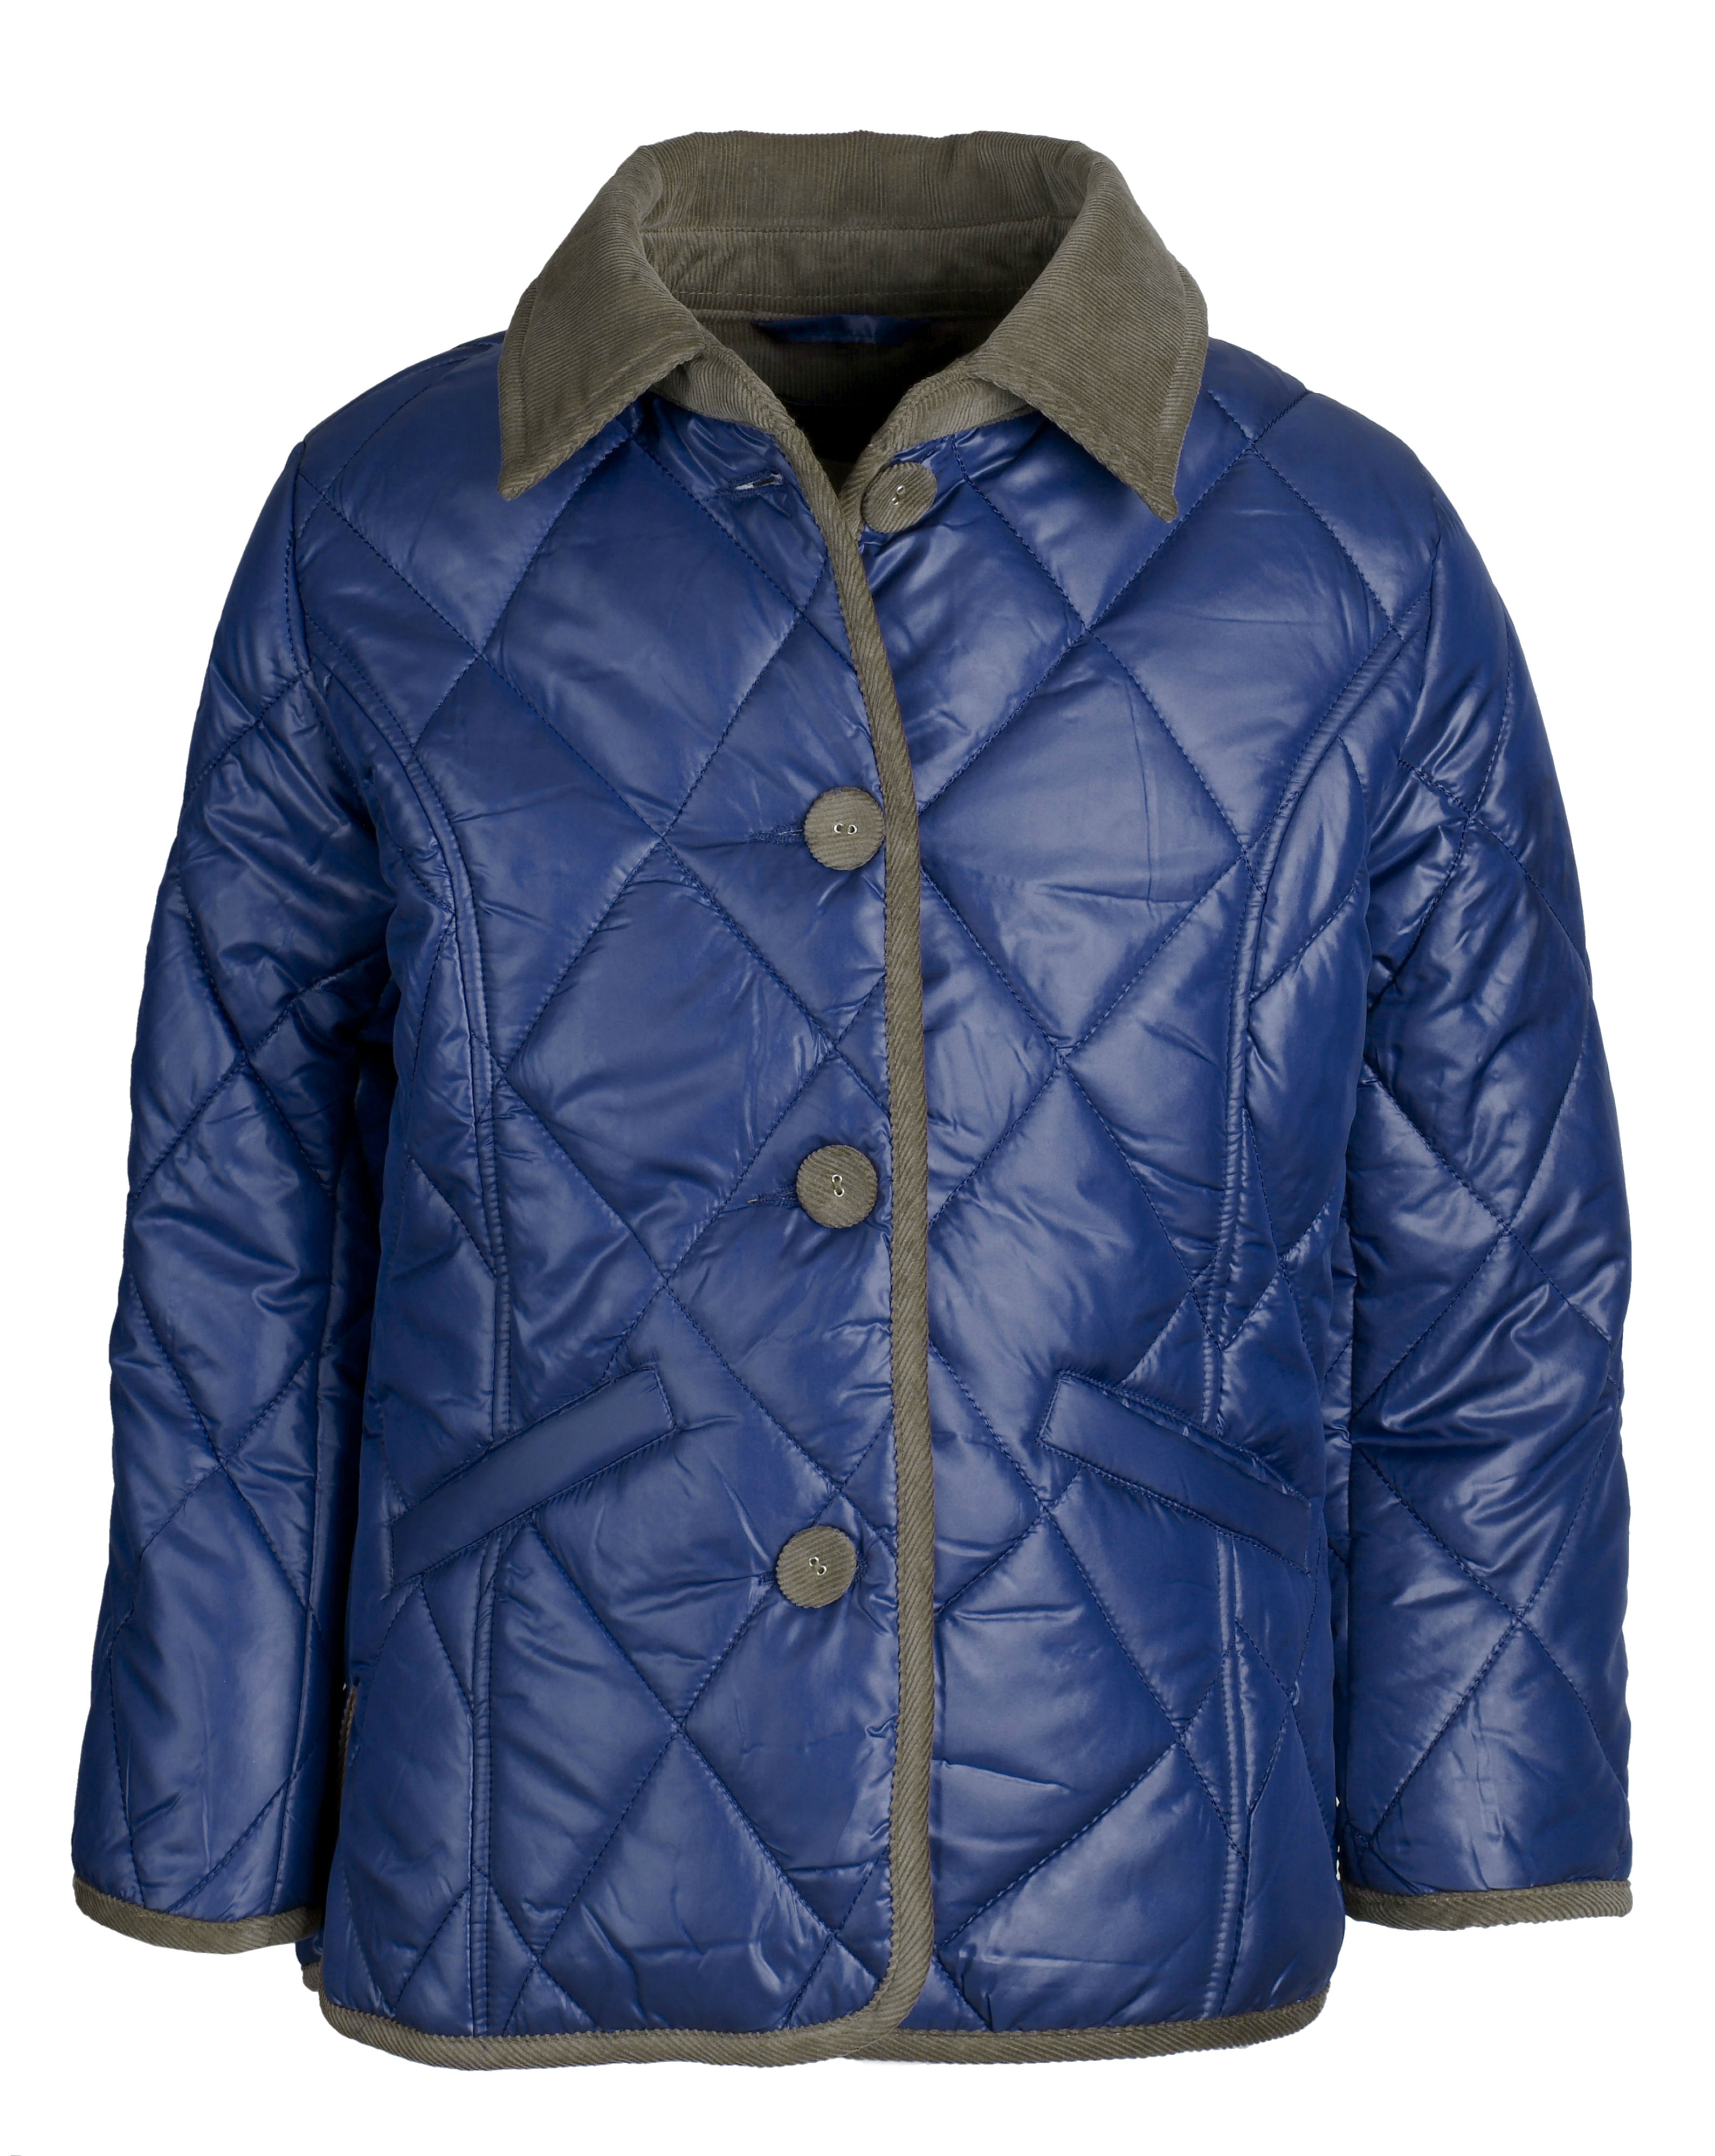 Arctic Circle Girls Padded Quilted Fall Winter Rain Trench Coat Jacket with Hood - image 4 of 4